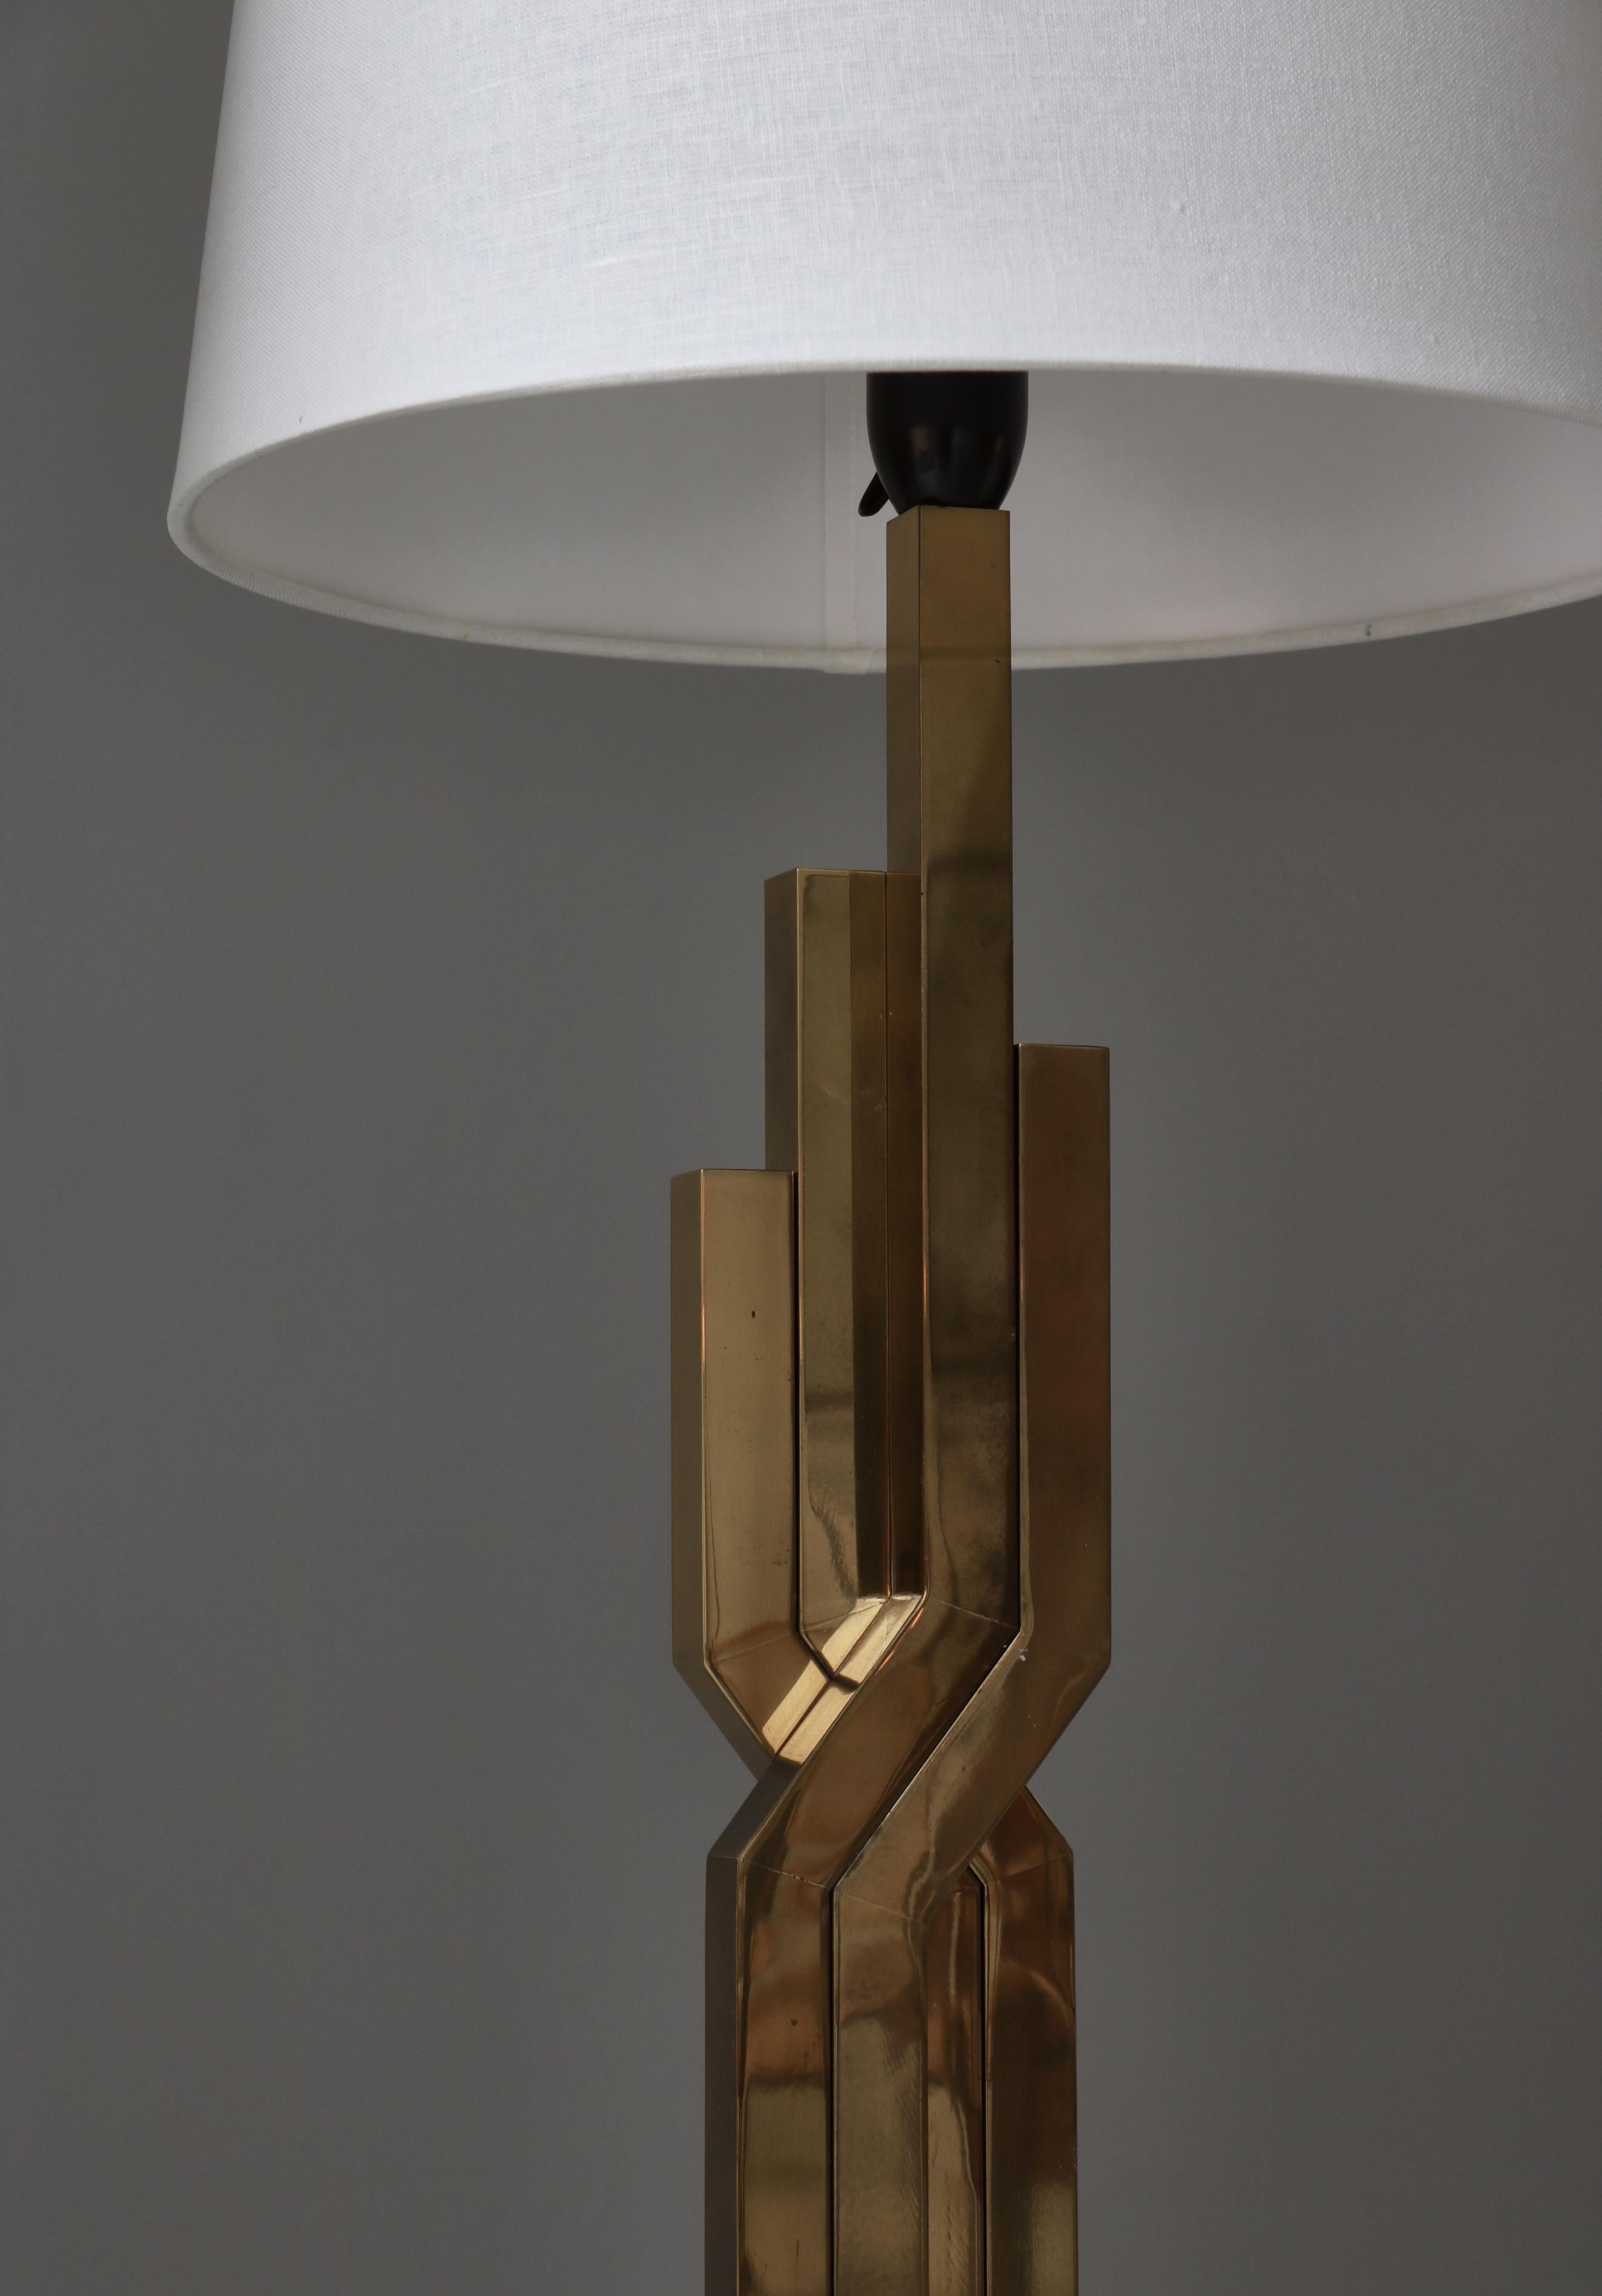 Large Danish Modern Table Lamps in Brass by Svend Aage Holm-Sørensen, 1960s For Sale 3